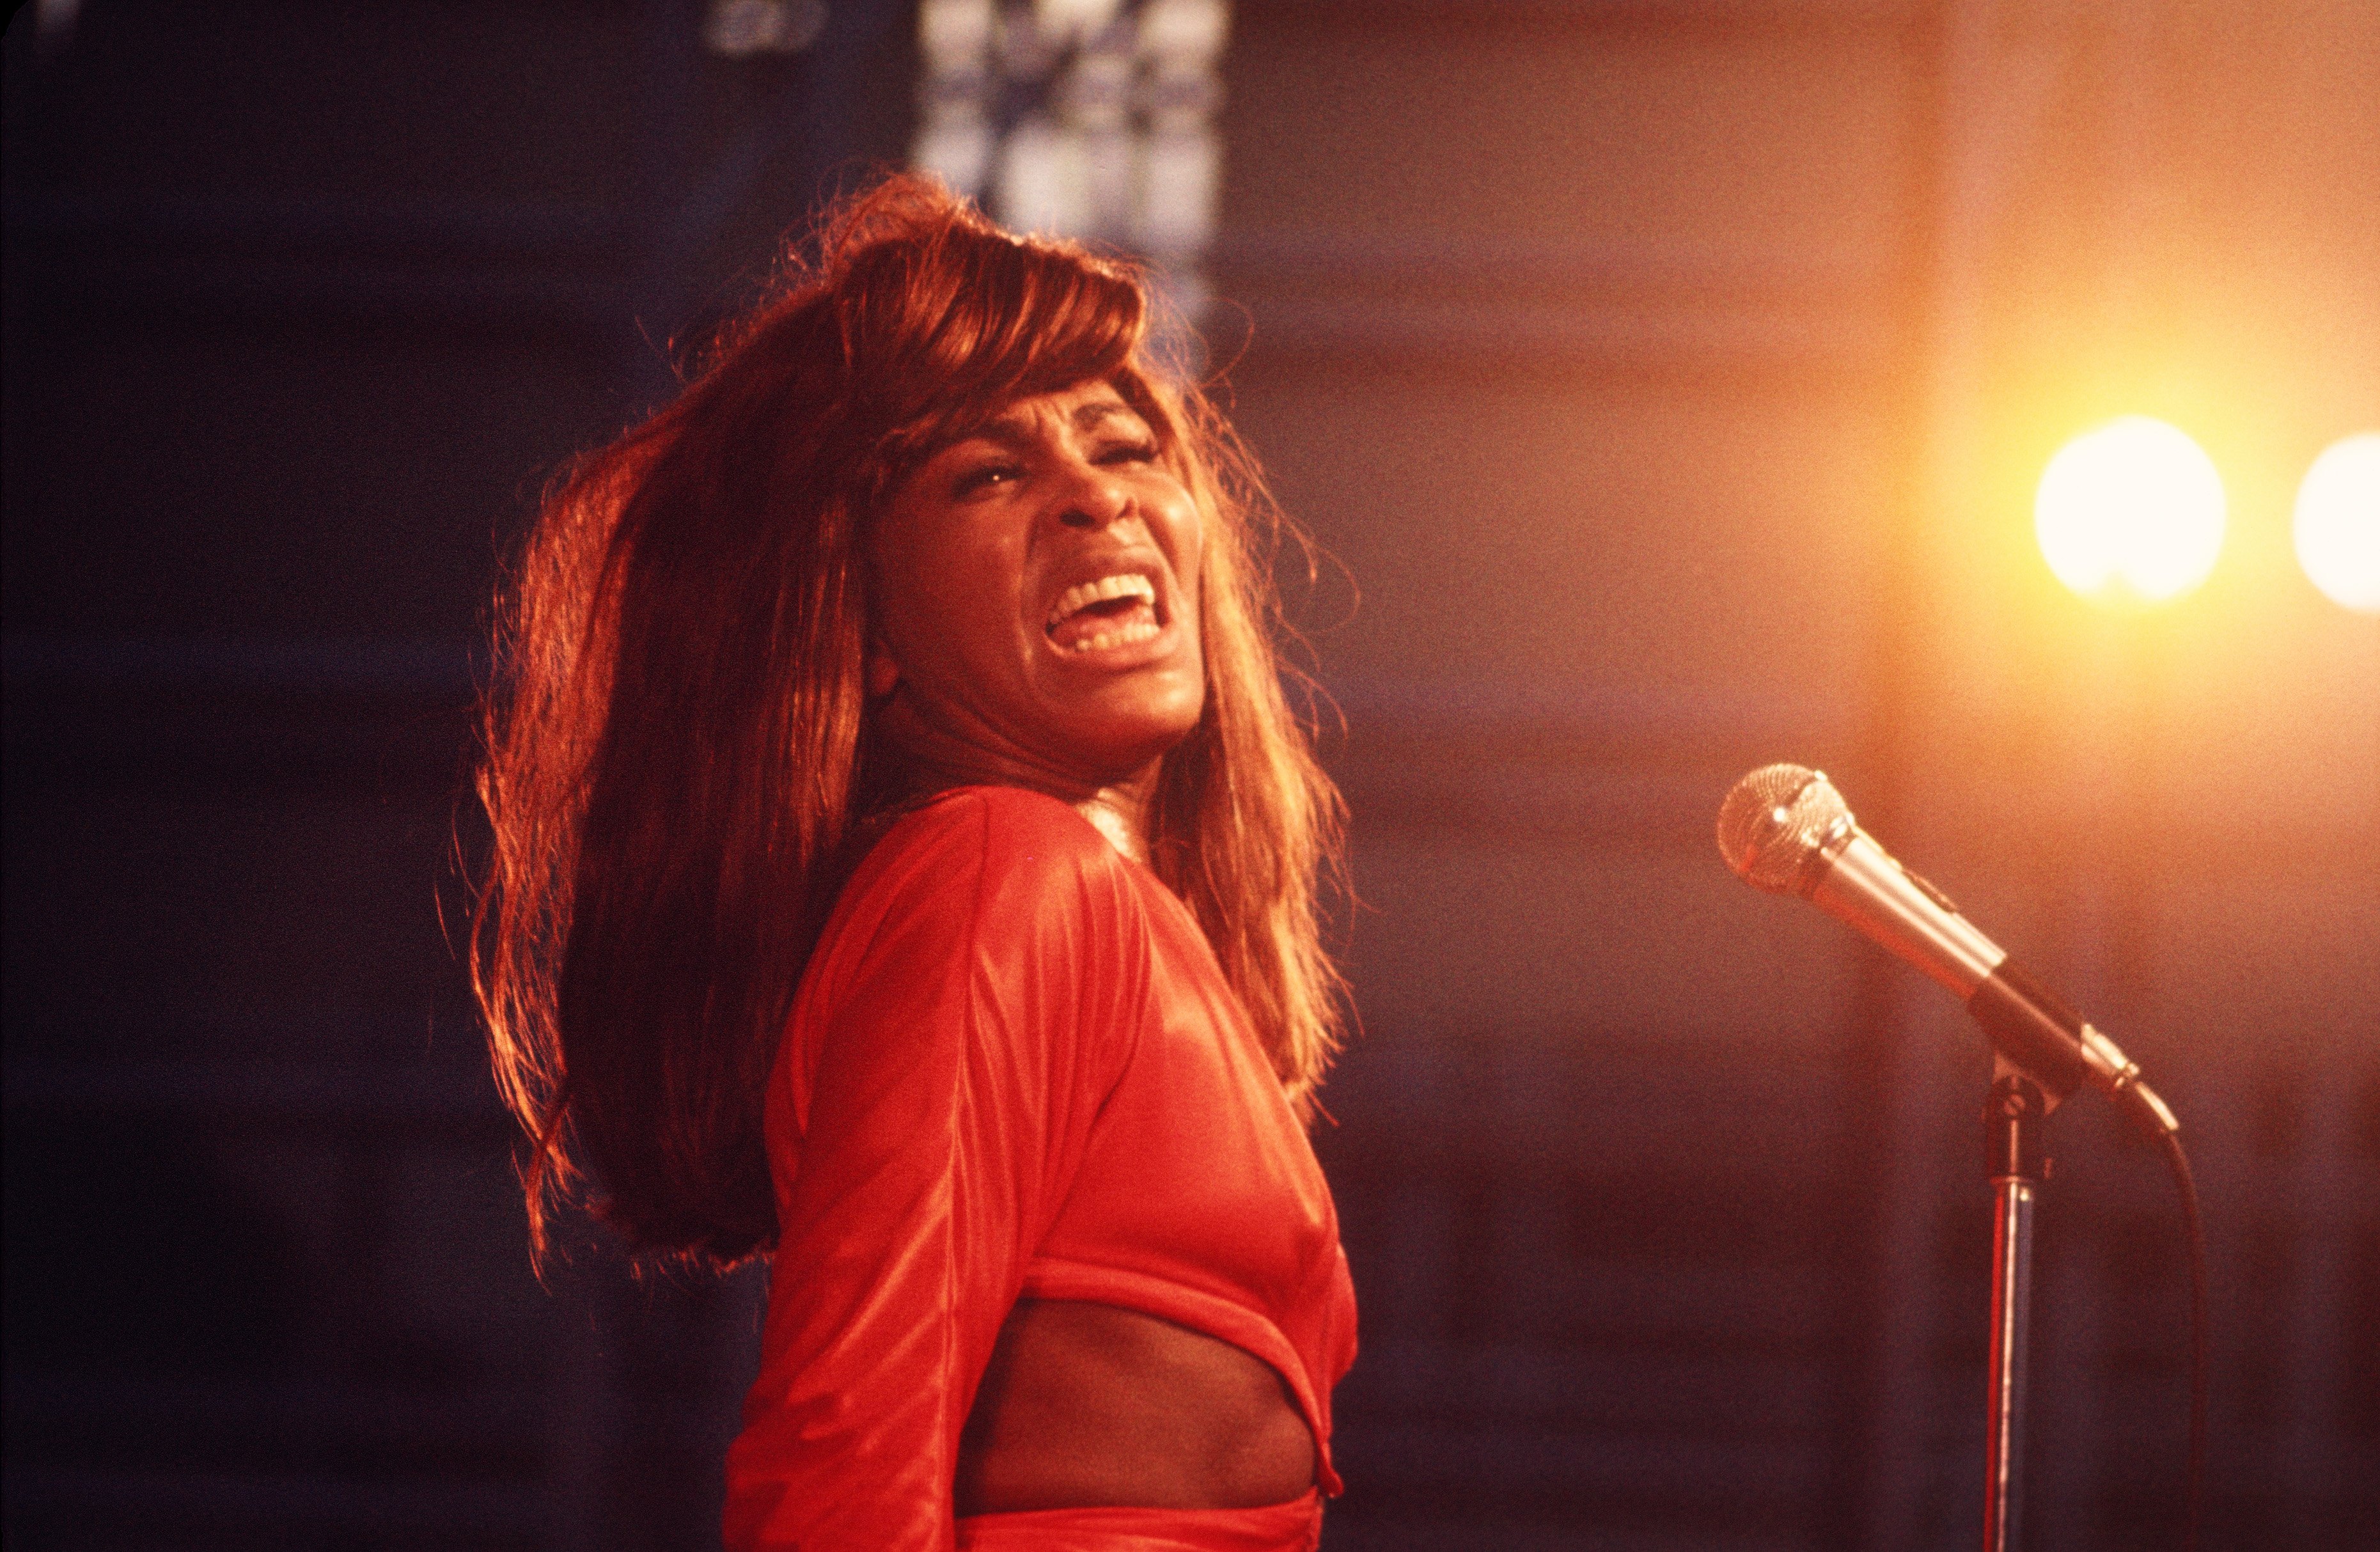 The singer performs during a concert at Central Park in Manhattan, New York in 1969. | Source: Getty Images